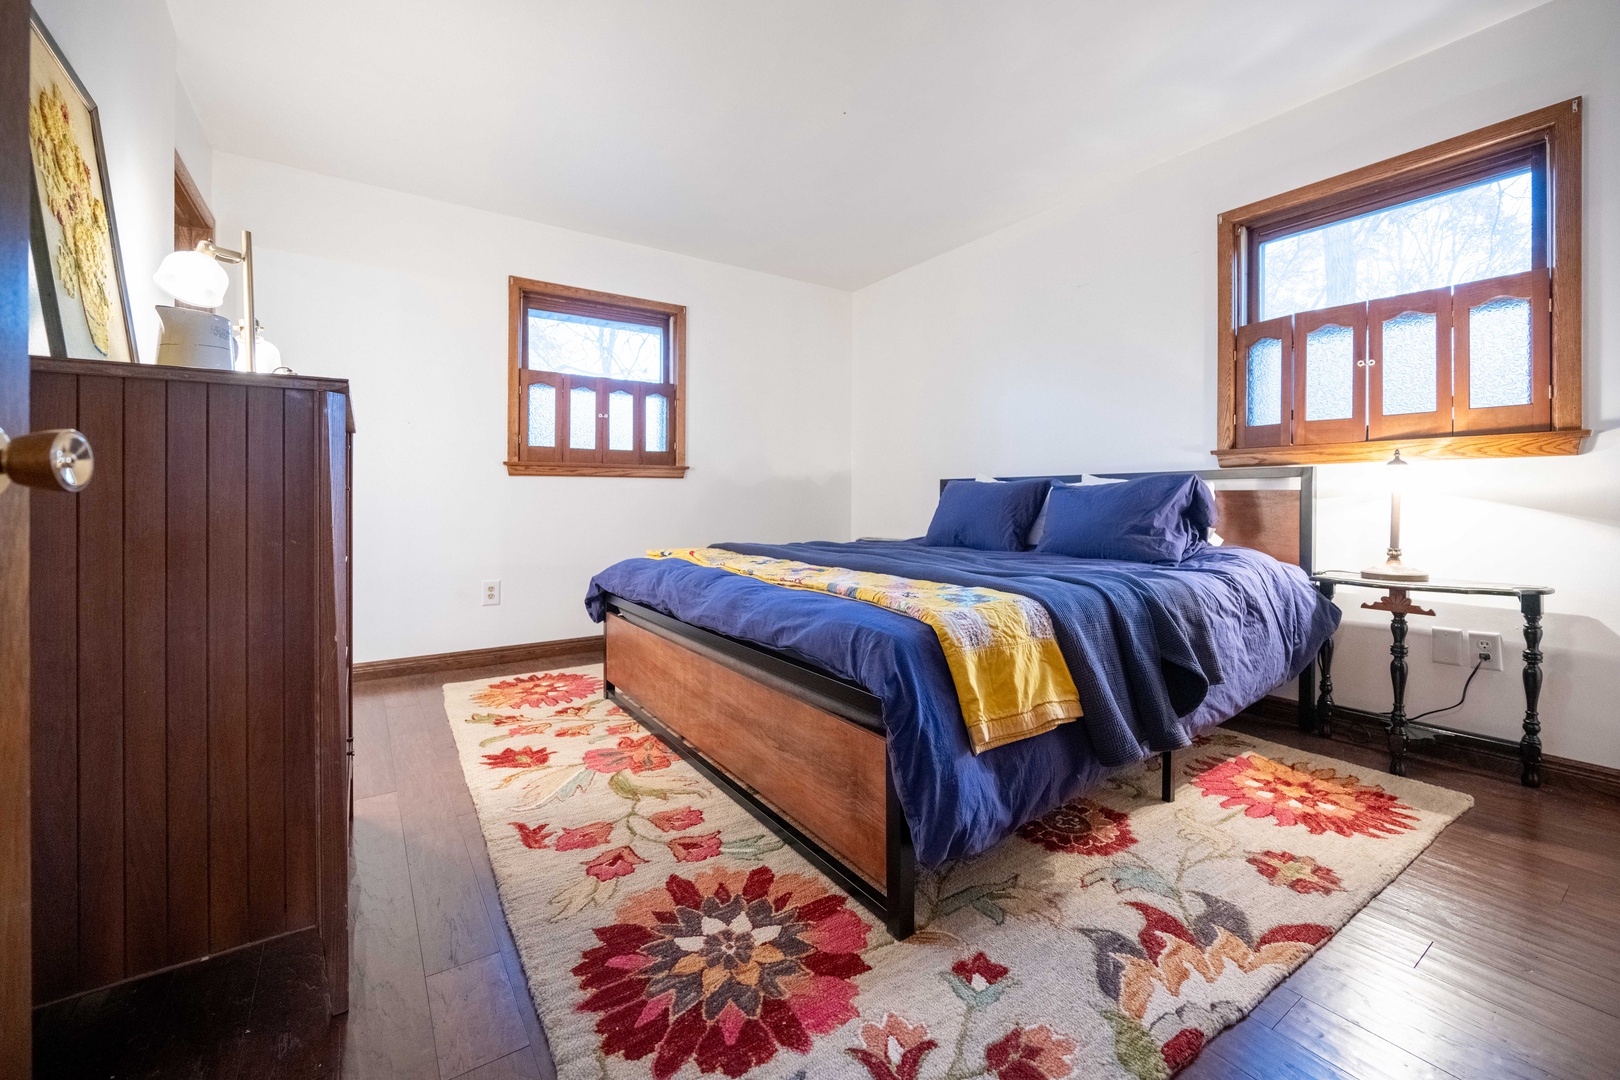 This 2nd floor suite includes a king bed & ensuite, which also connects to the hall